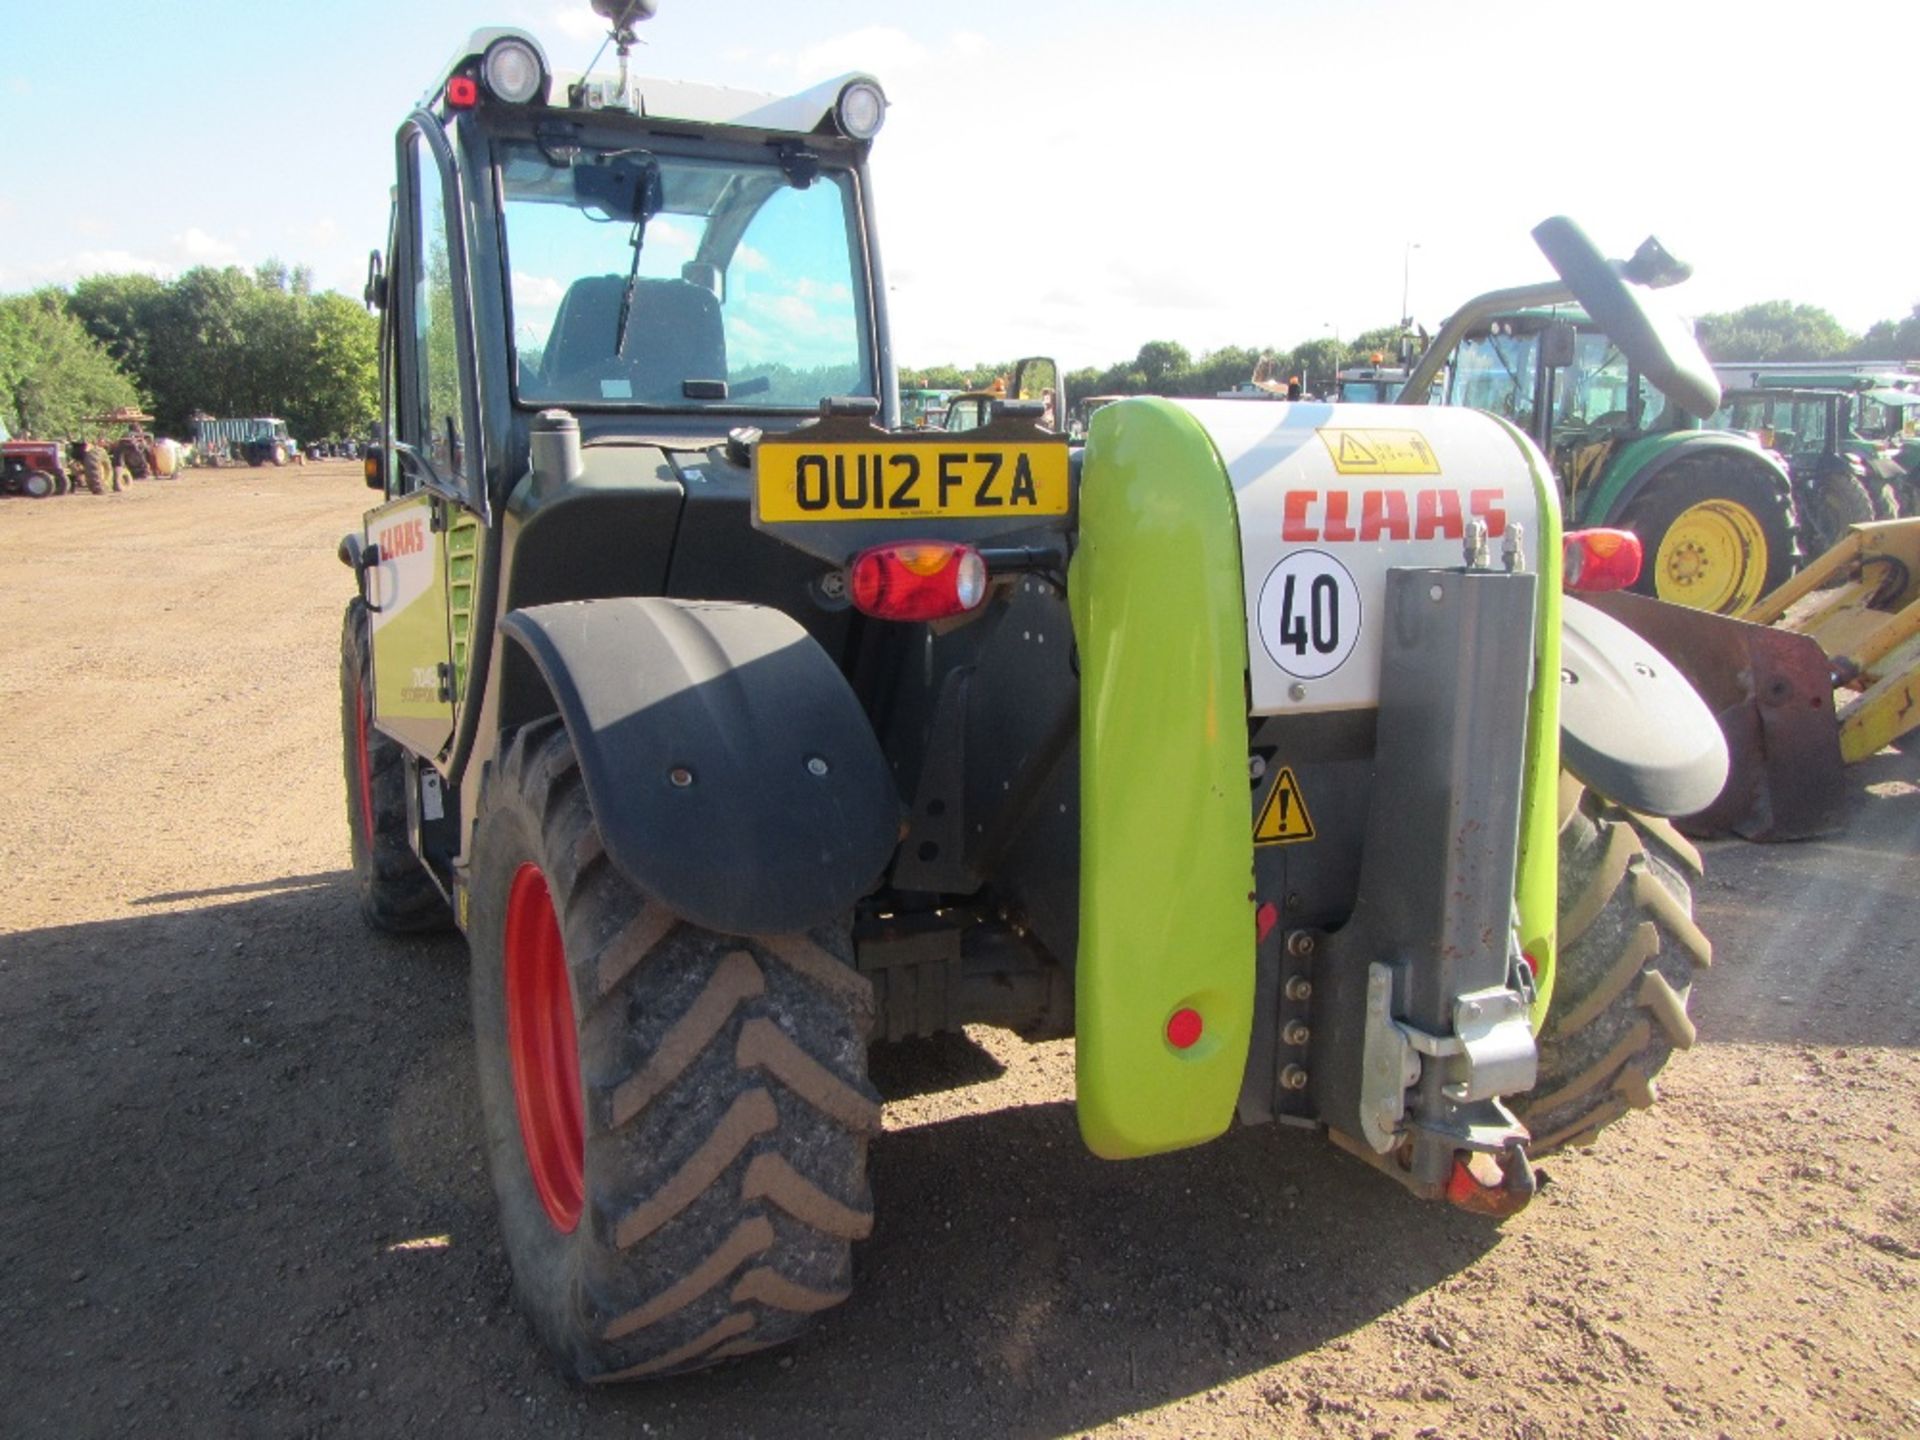 Claas Scorpion 7045. V5 will be supplied Reg. No. OU12 FZA Ser No 403030743 - Image 6 of 8